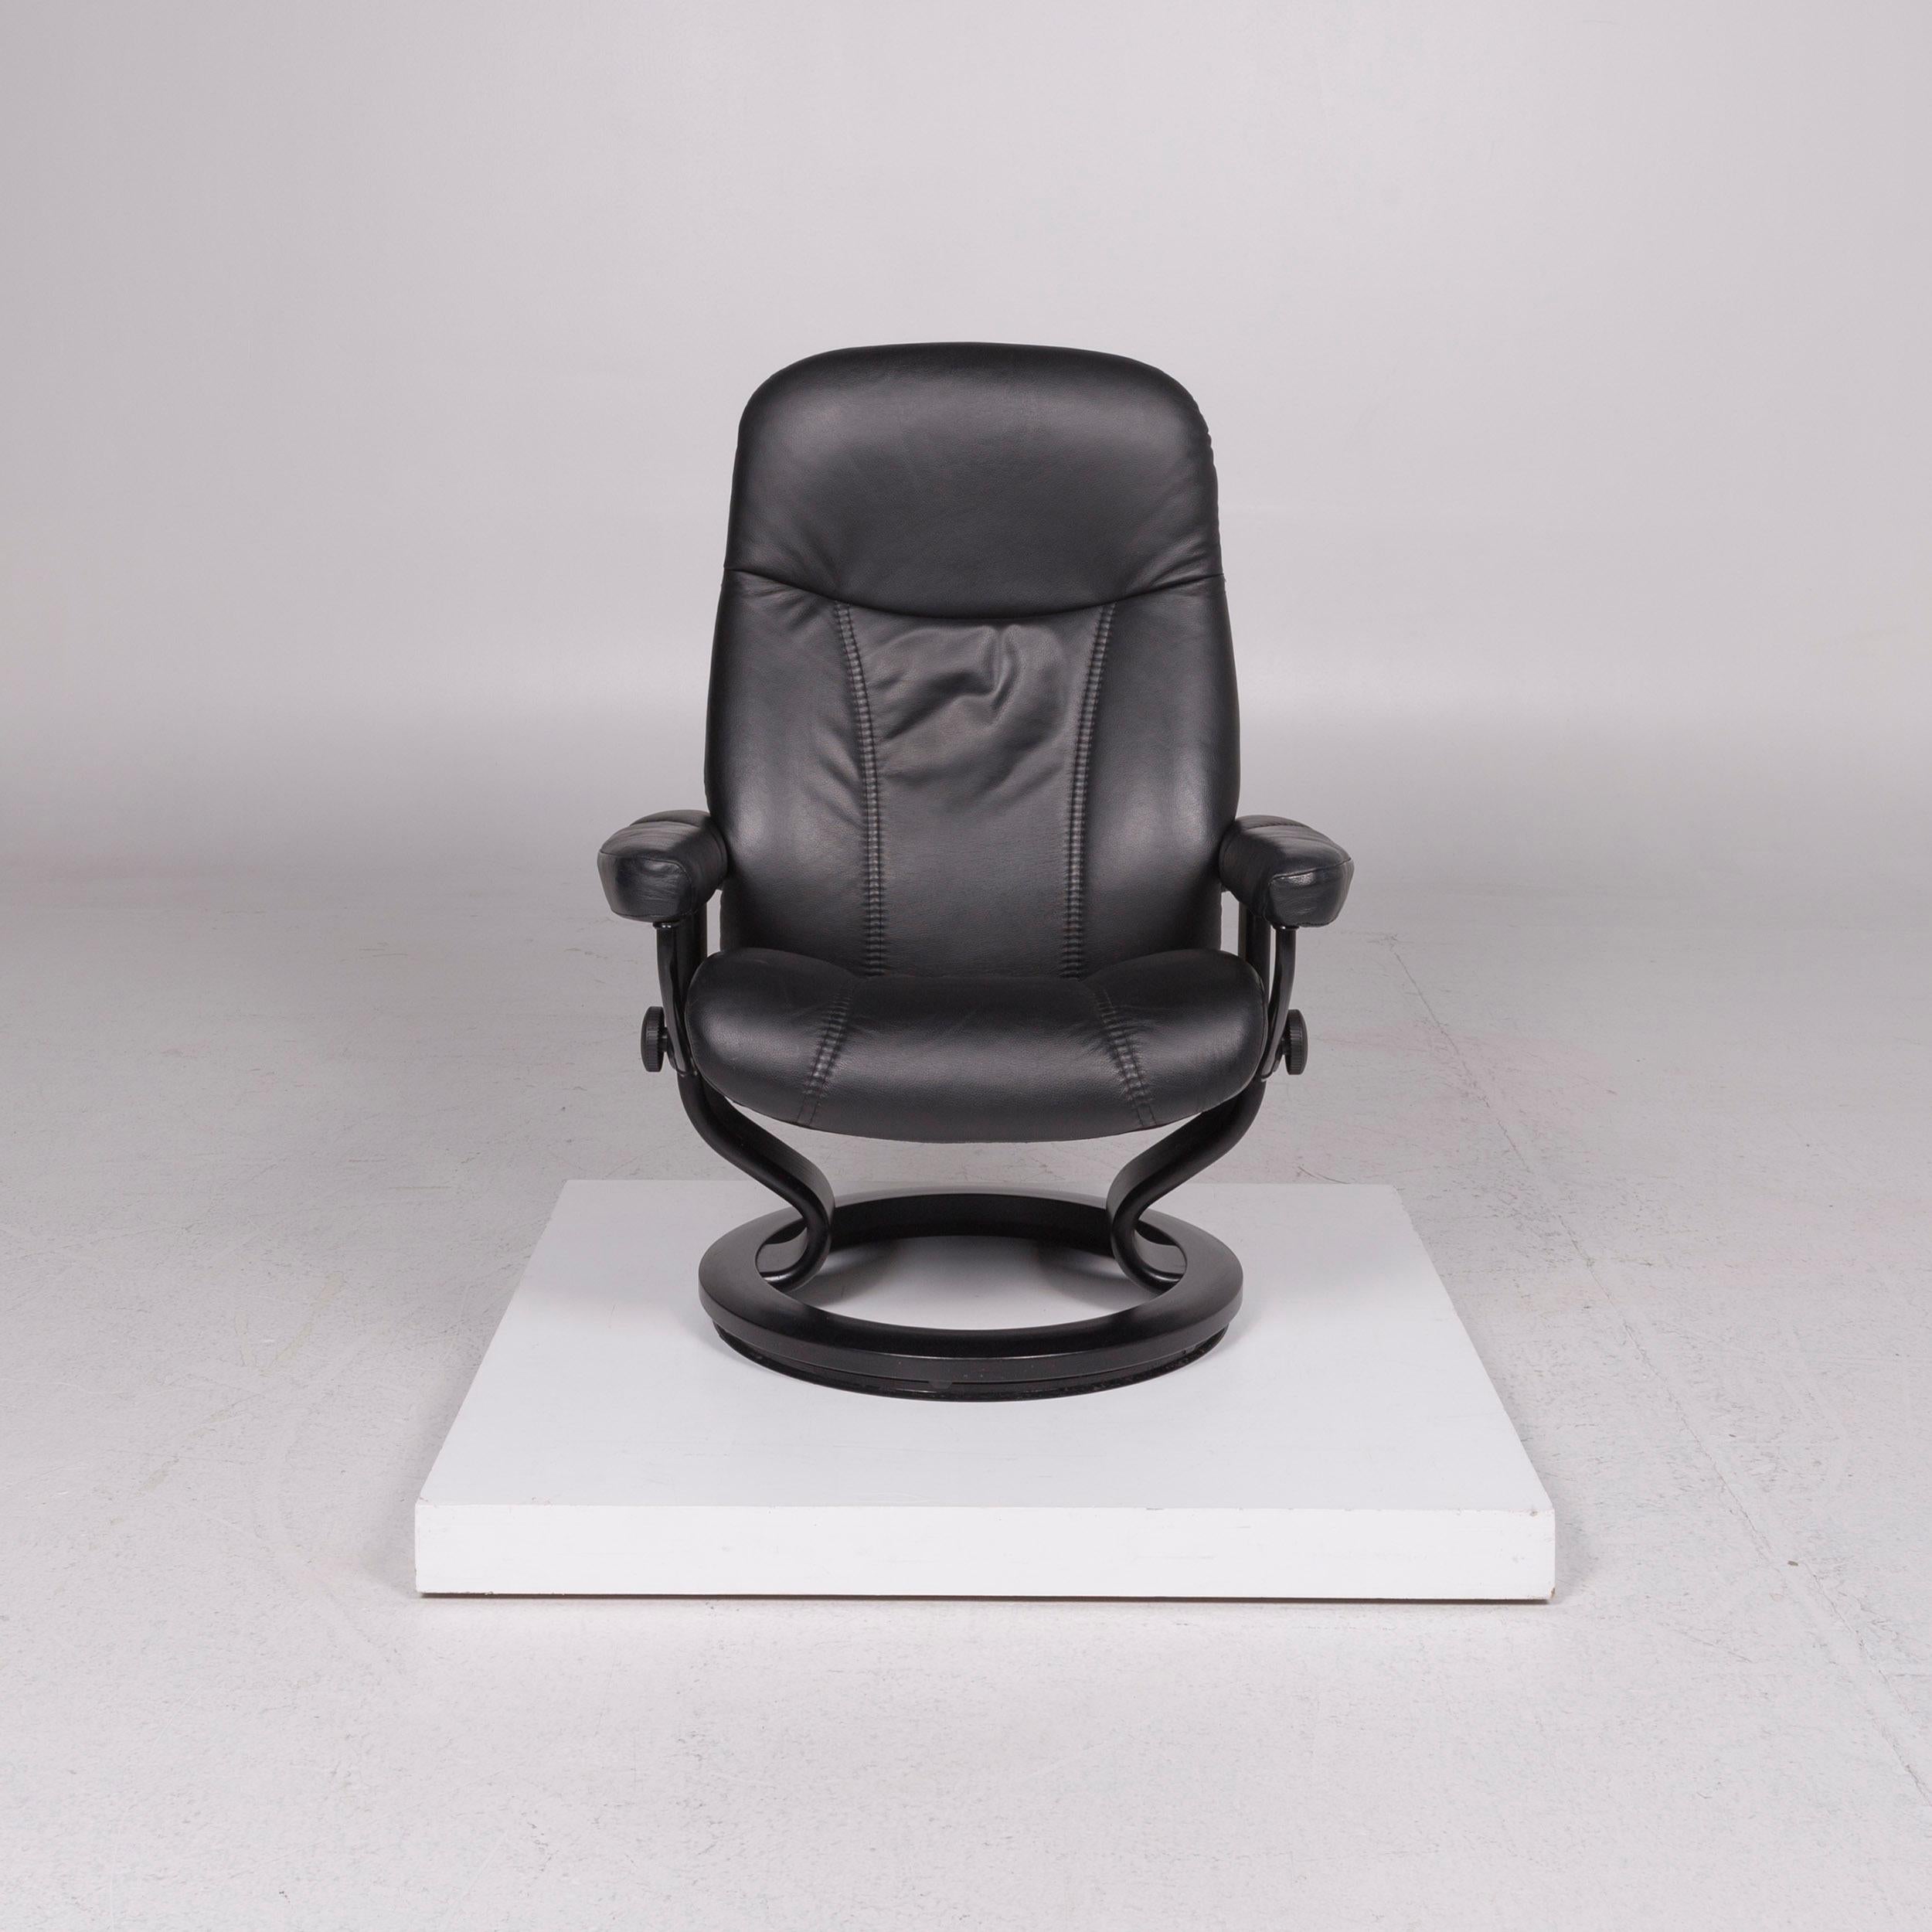 We bring to you a Stressless Consul leather armchair black incl. Stool size M relax function.

 Product measurements in centimeters:
 

Depth 82
Width 75
Height 101
Seat-height 39
Rest-height 51
Seat-depth 46
Seat-width 55
Back-height